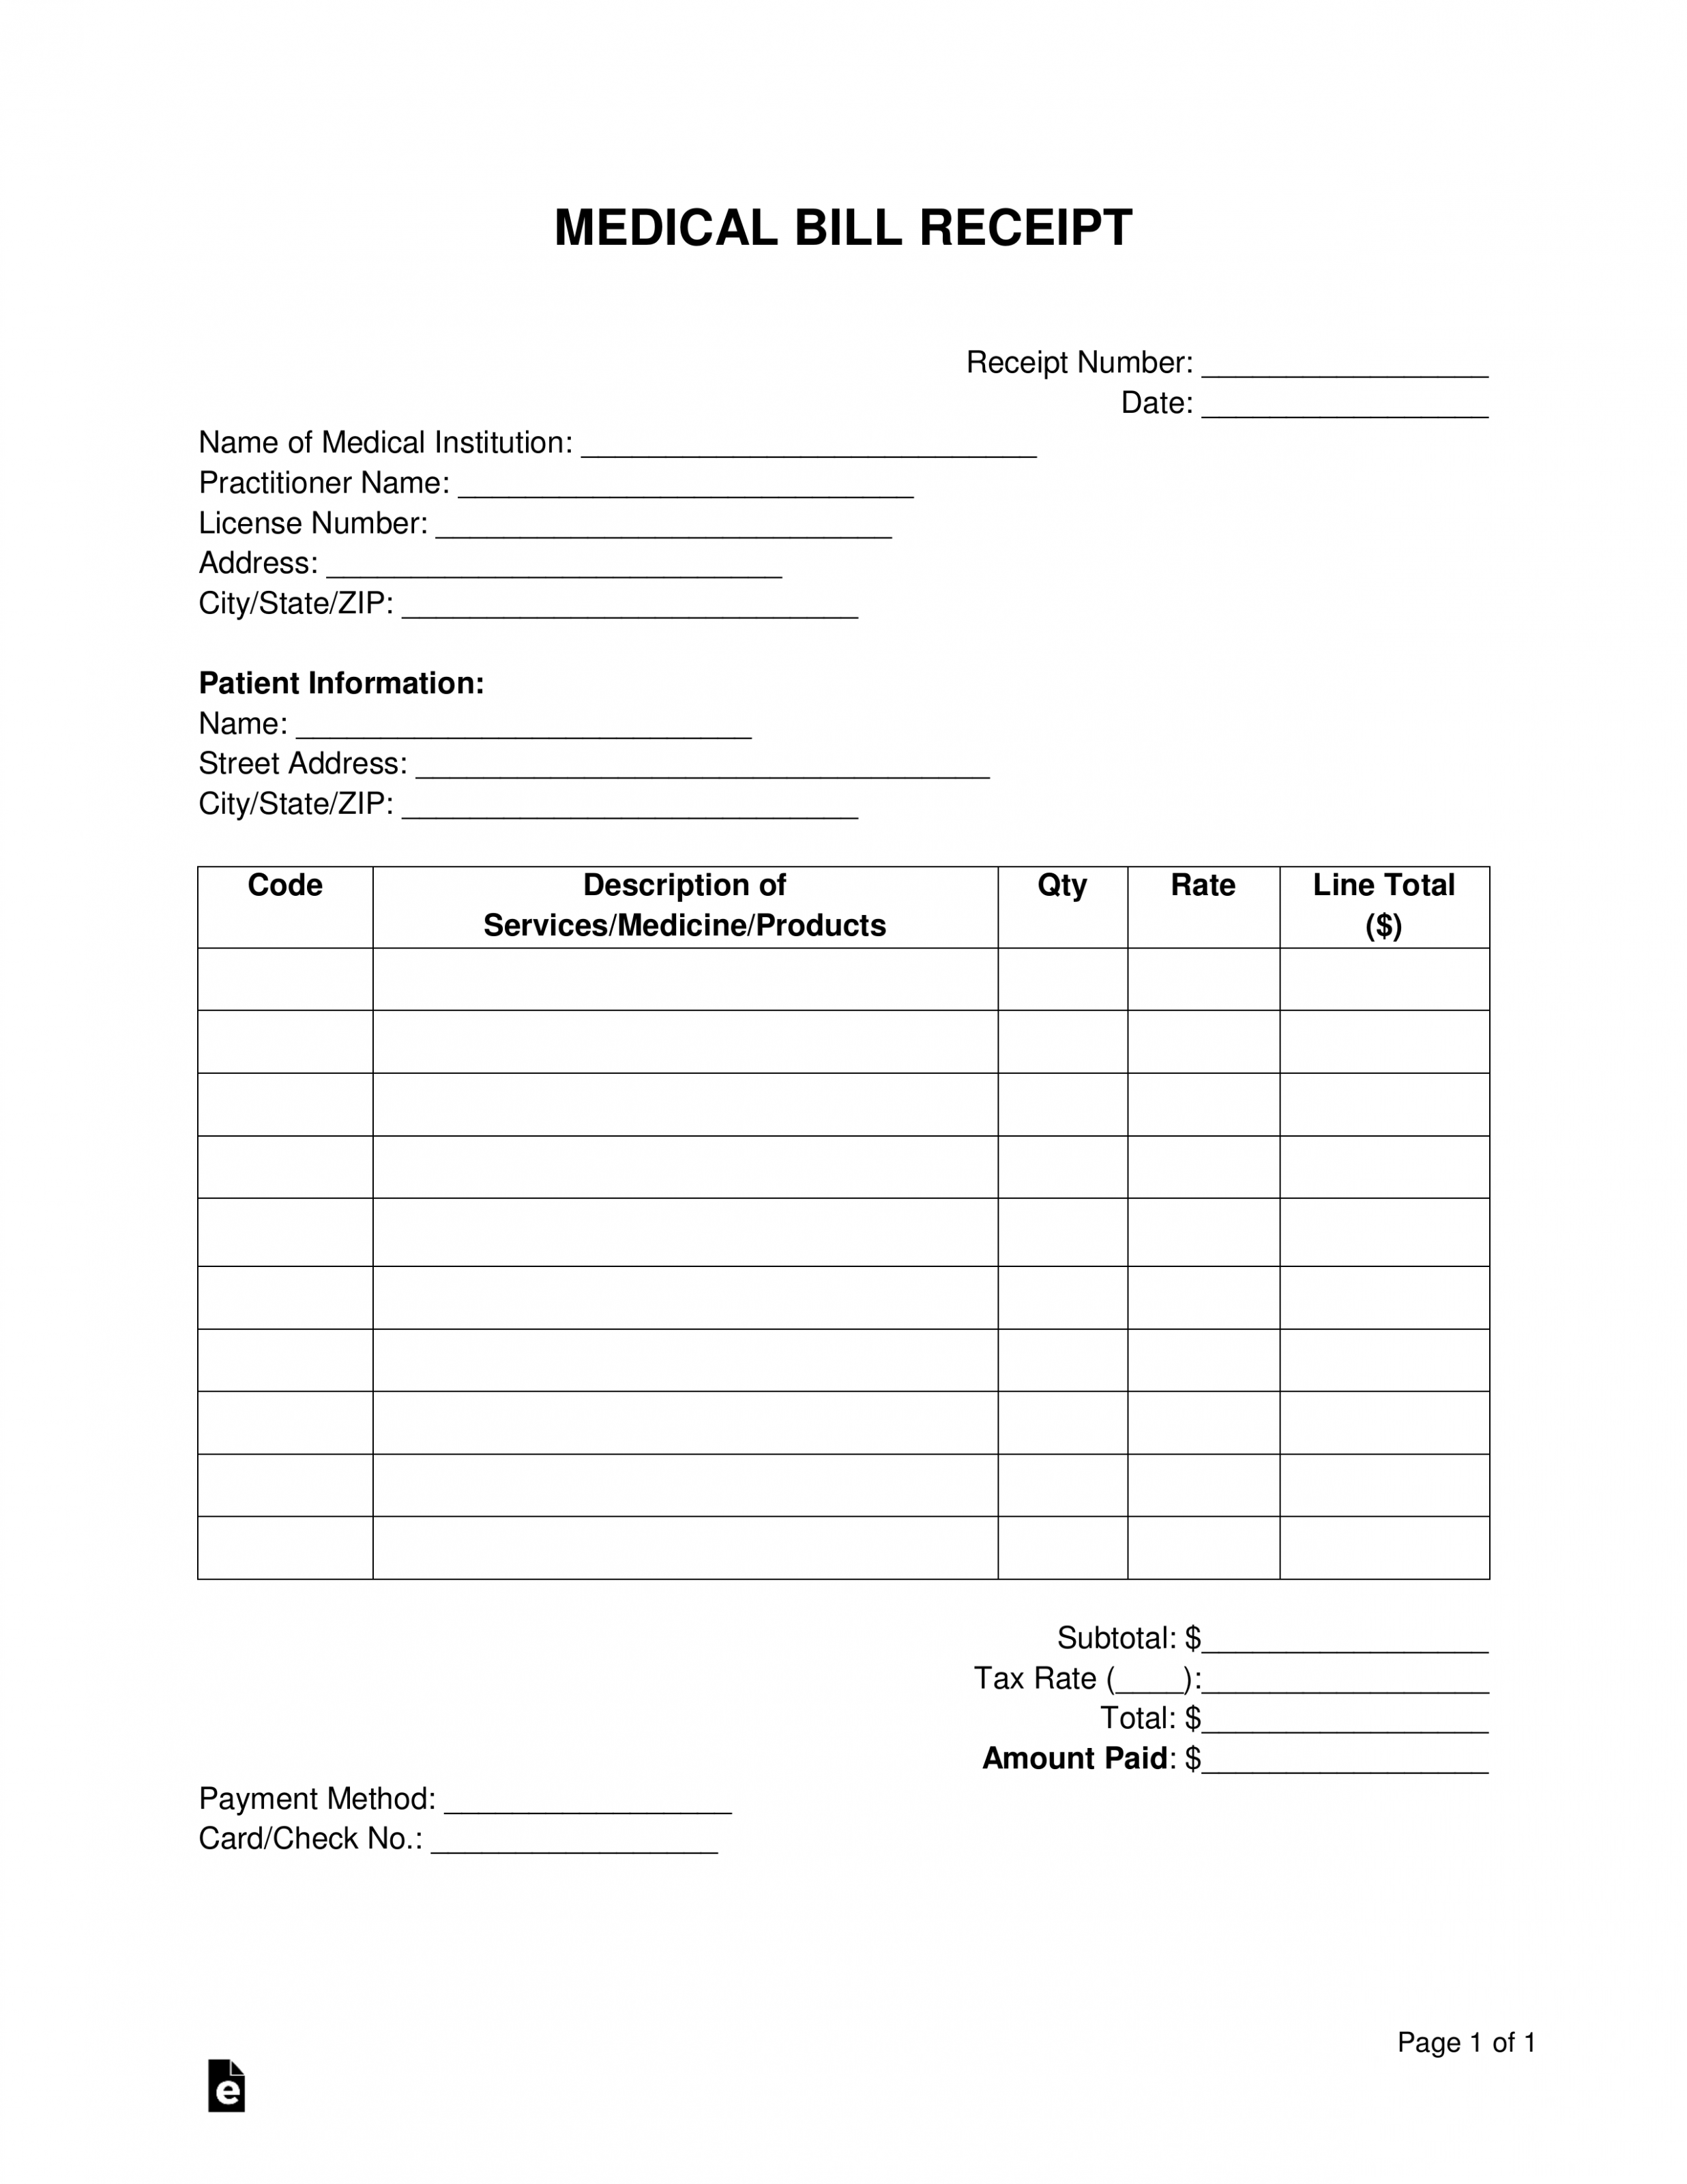 Sample Medical Bill Invoice Template Excel